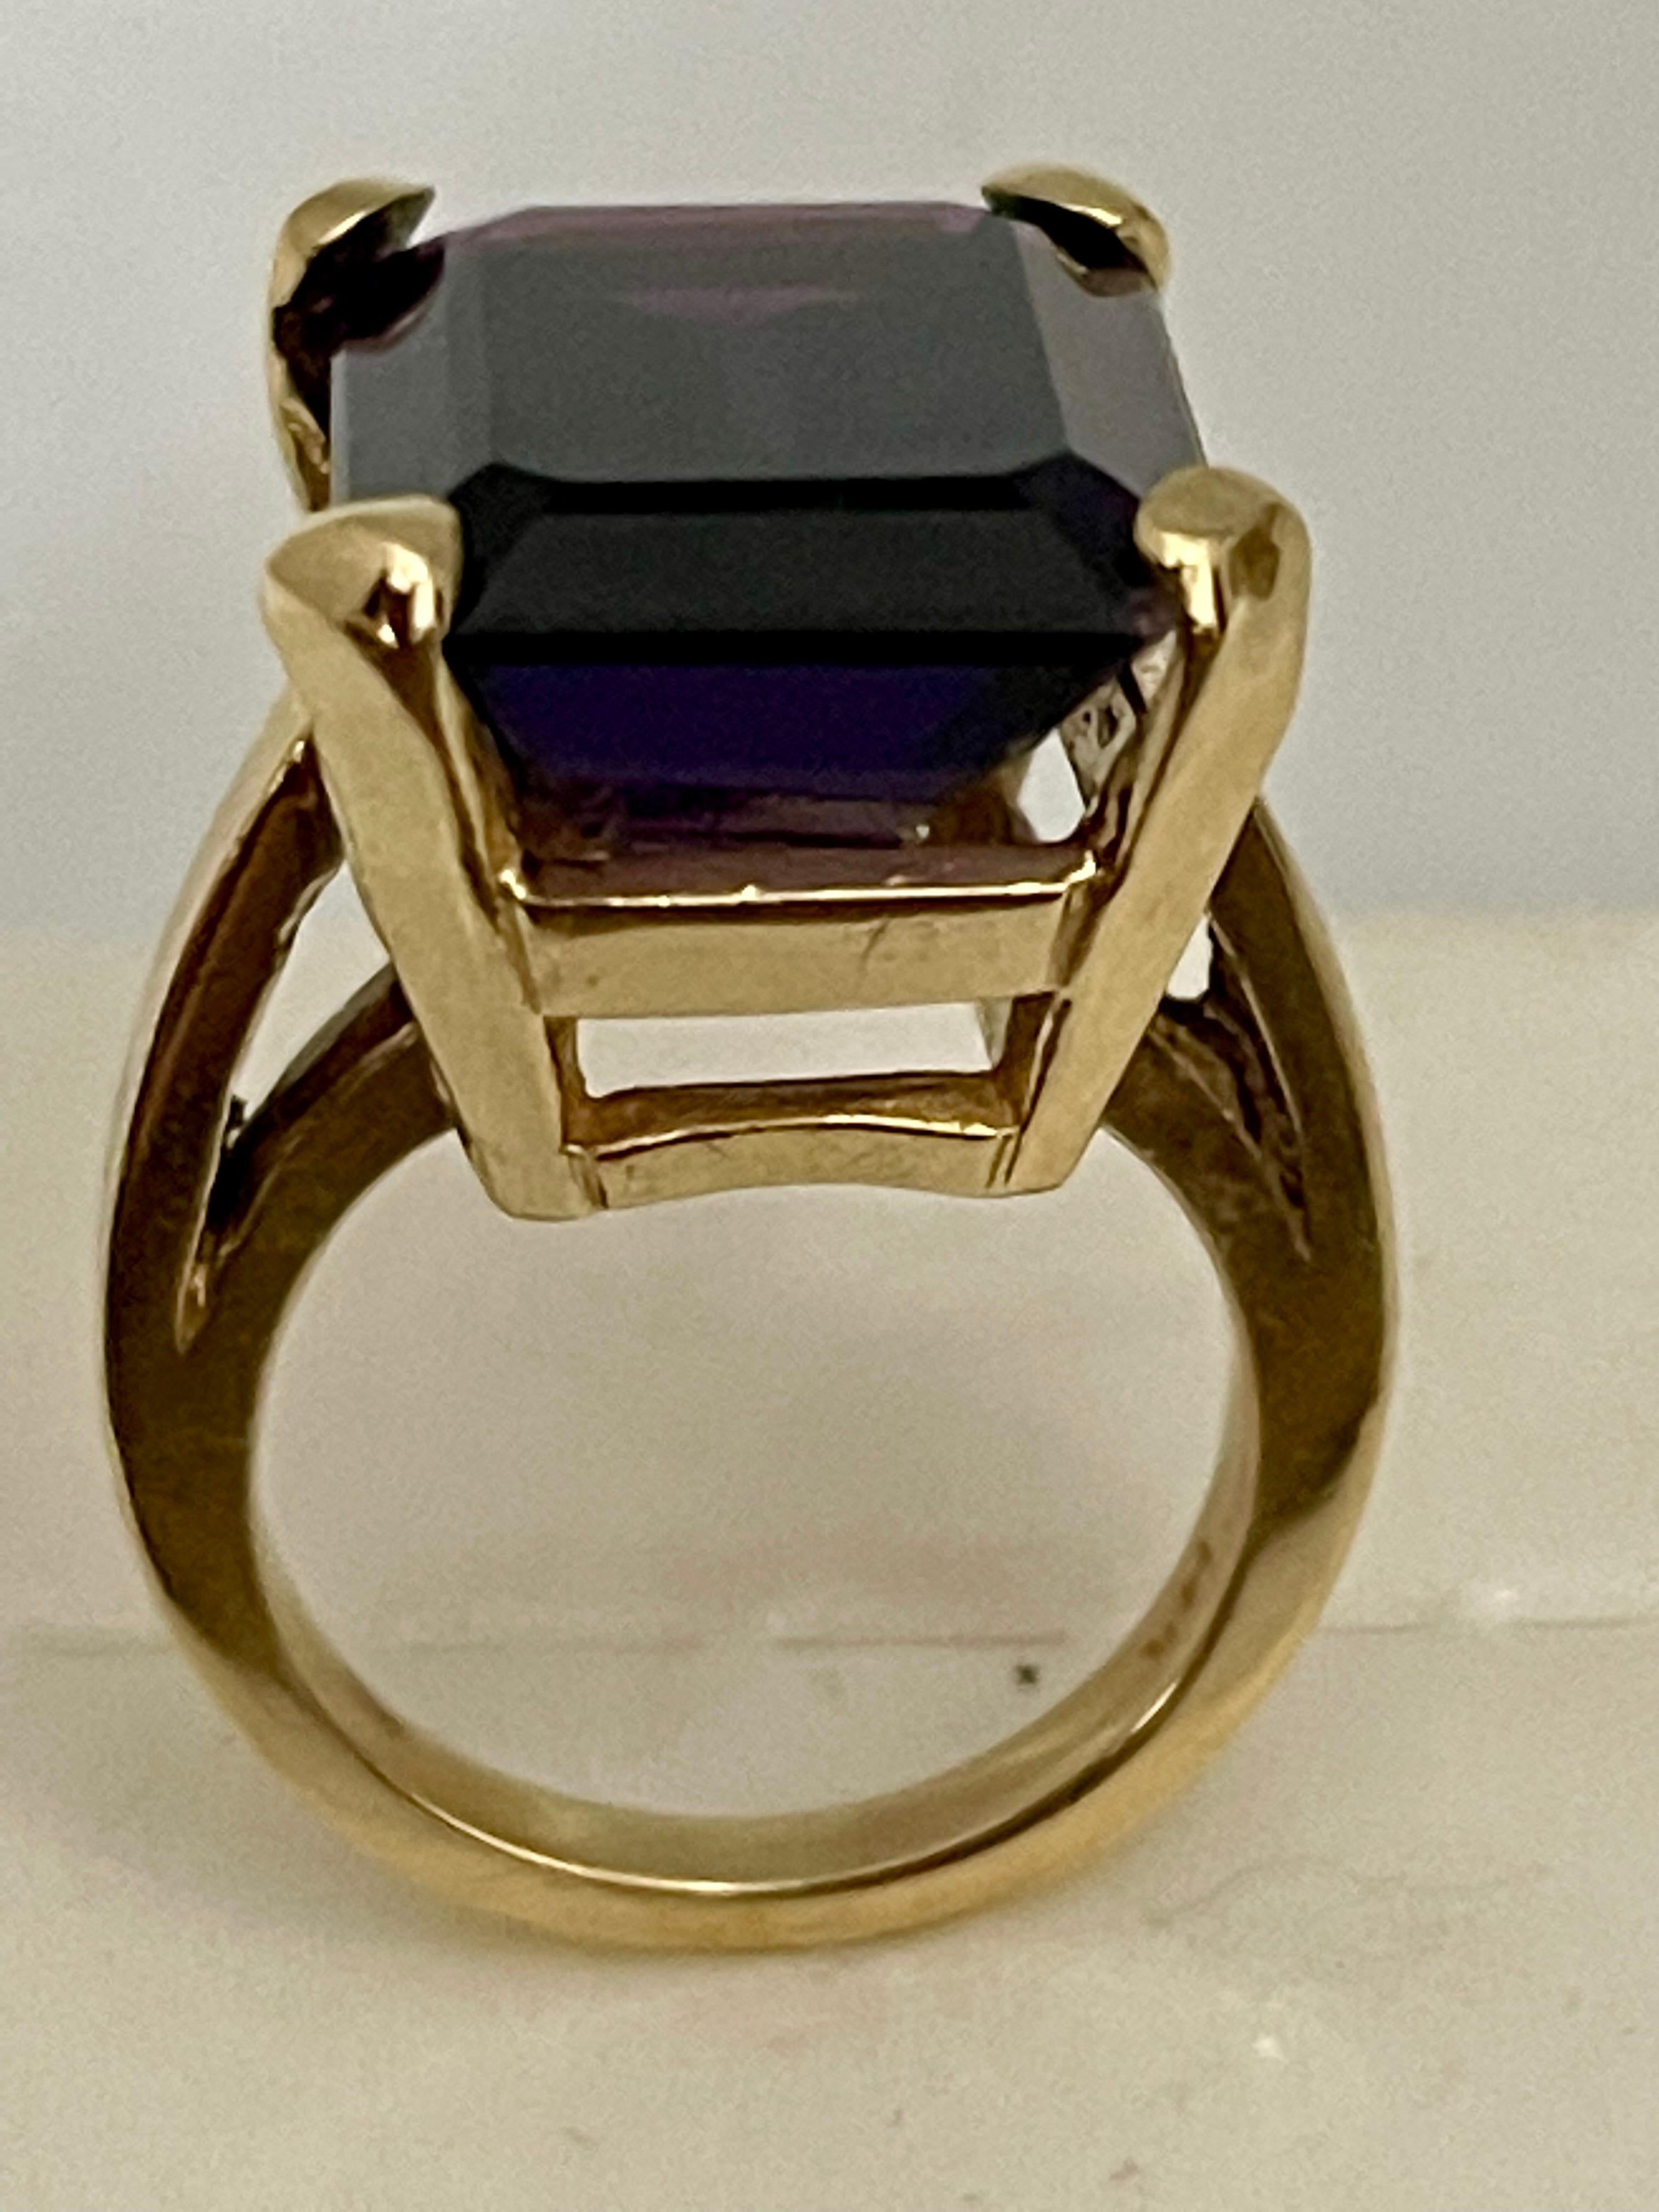 15 Carat Emerald Cut Amethyst Cocktail Ring in 14 Karat Yellow Gold In Excellent Condition For Sale In New York, NY